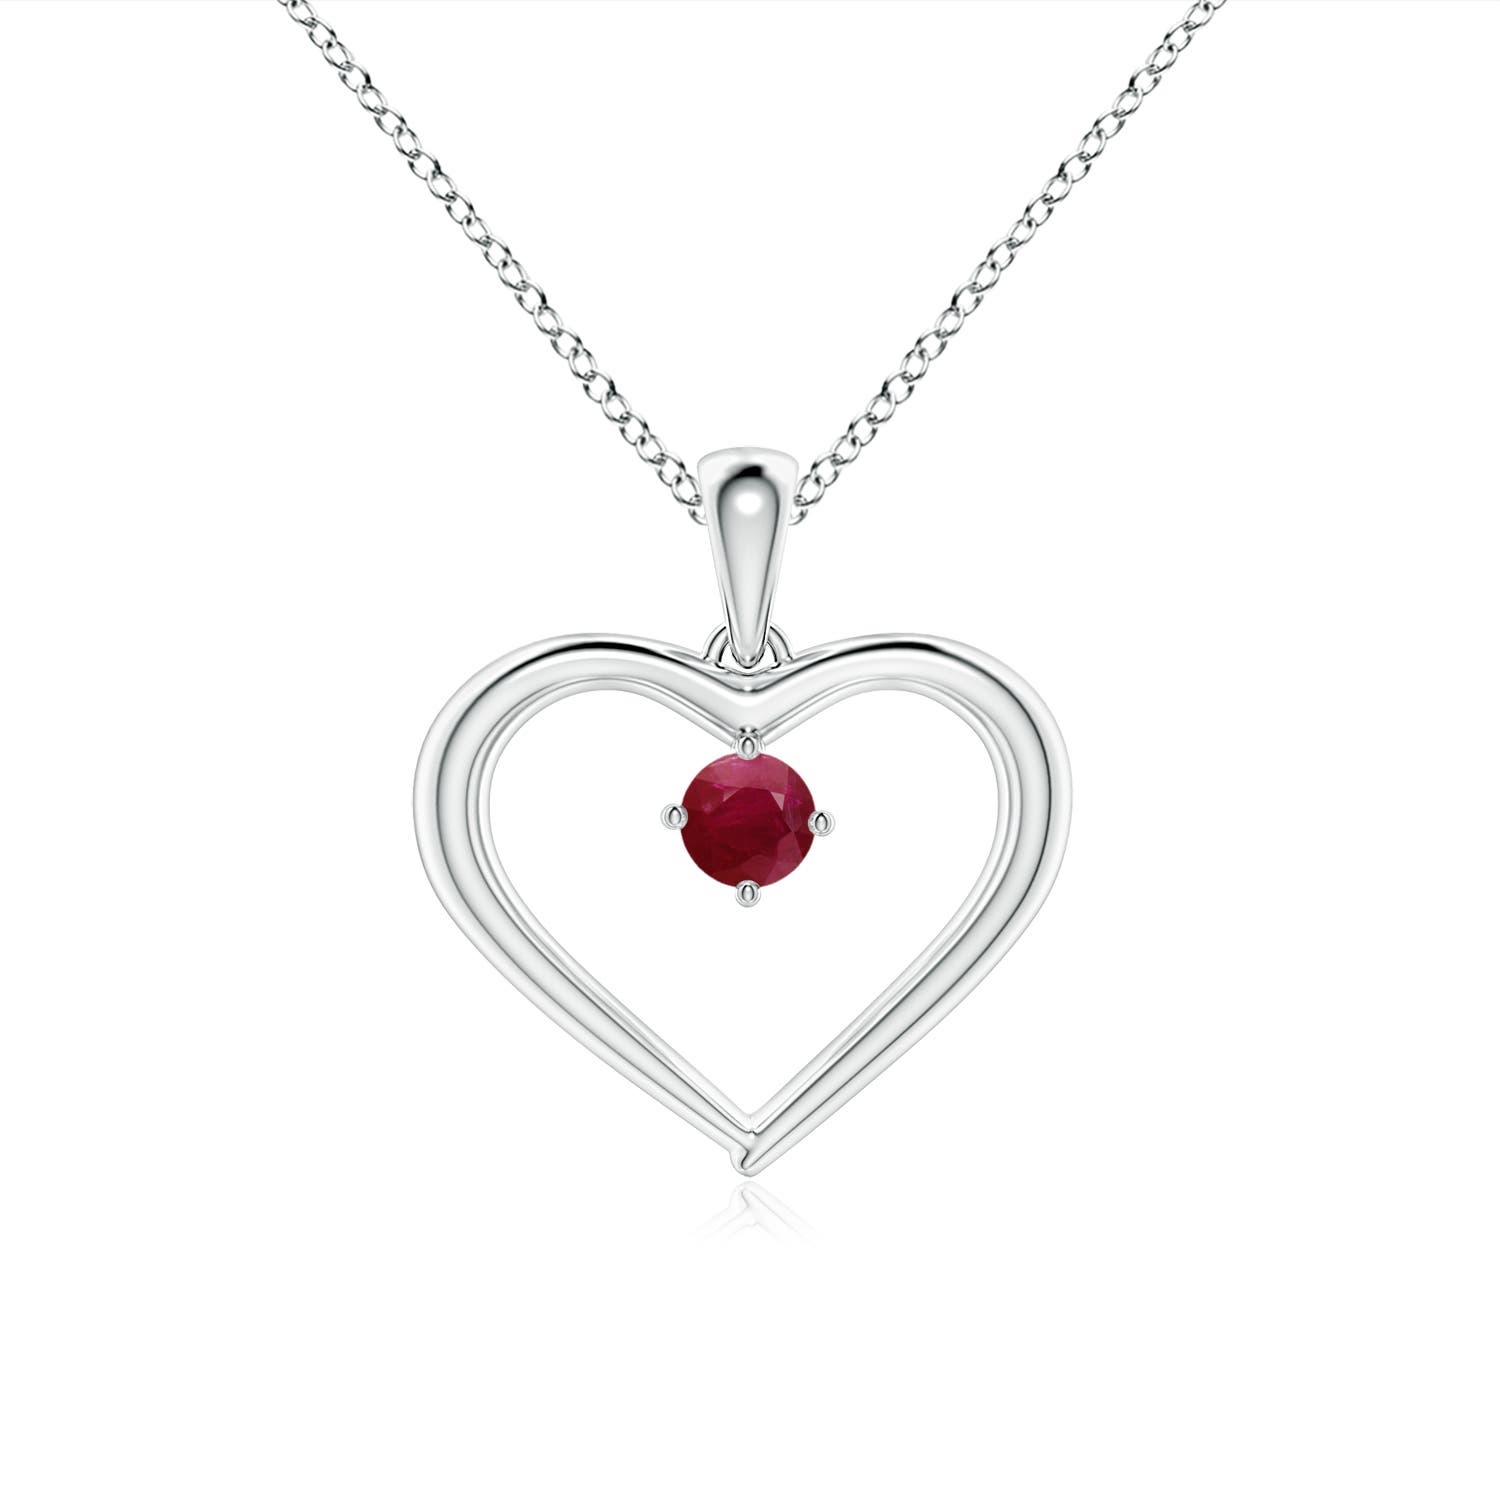 A - Ruby / 0.15 CT / 14 KT White Gold